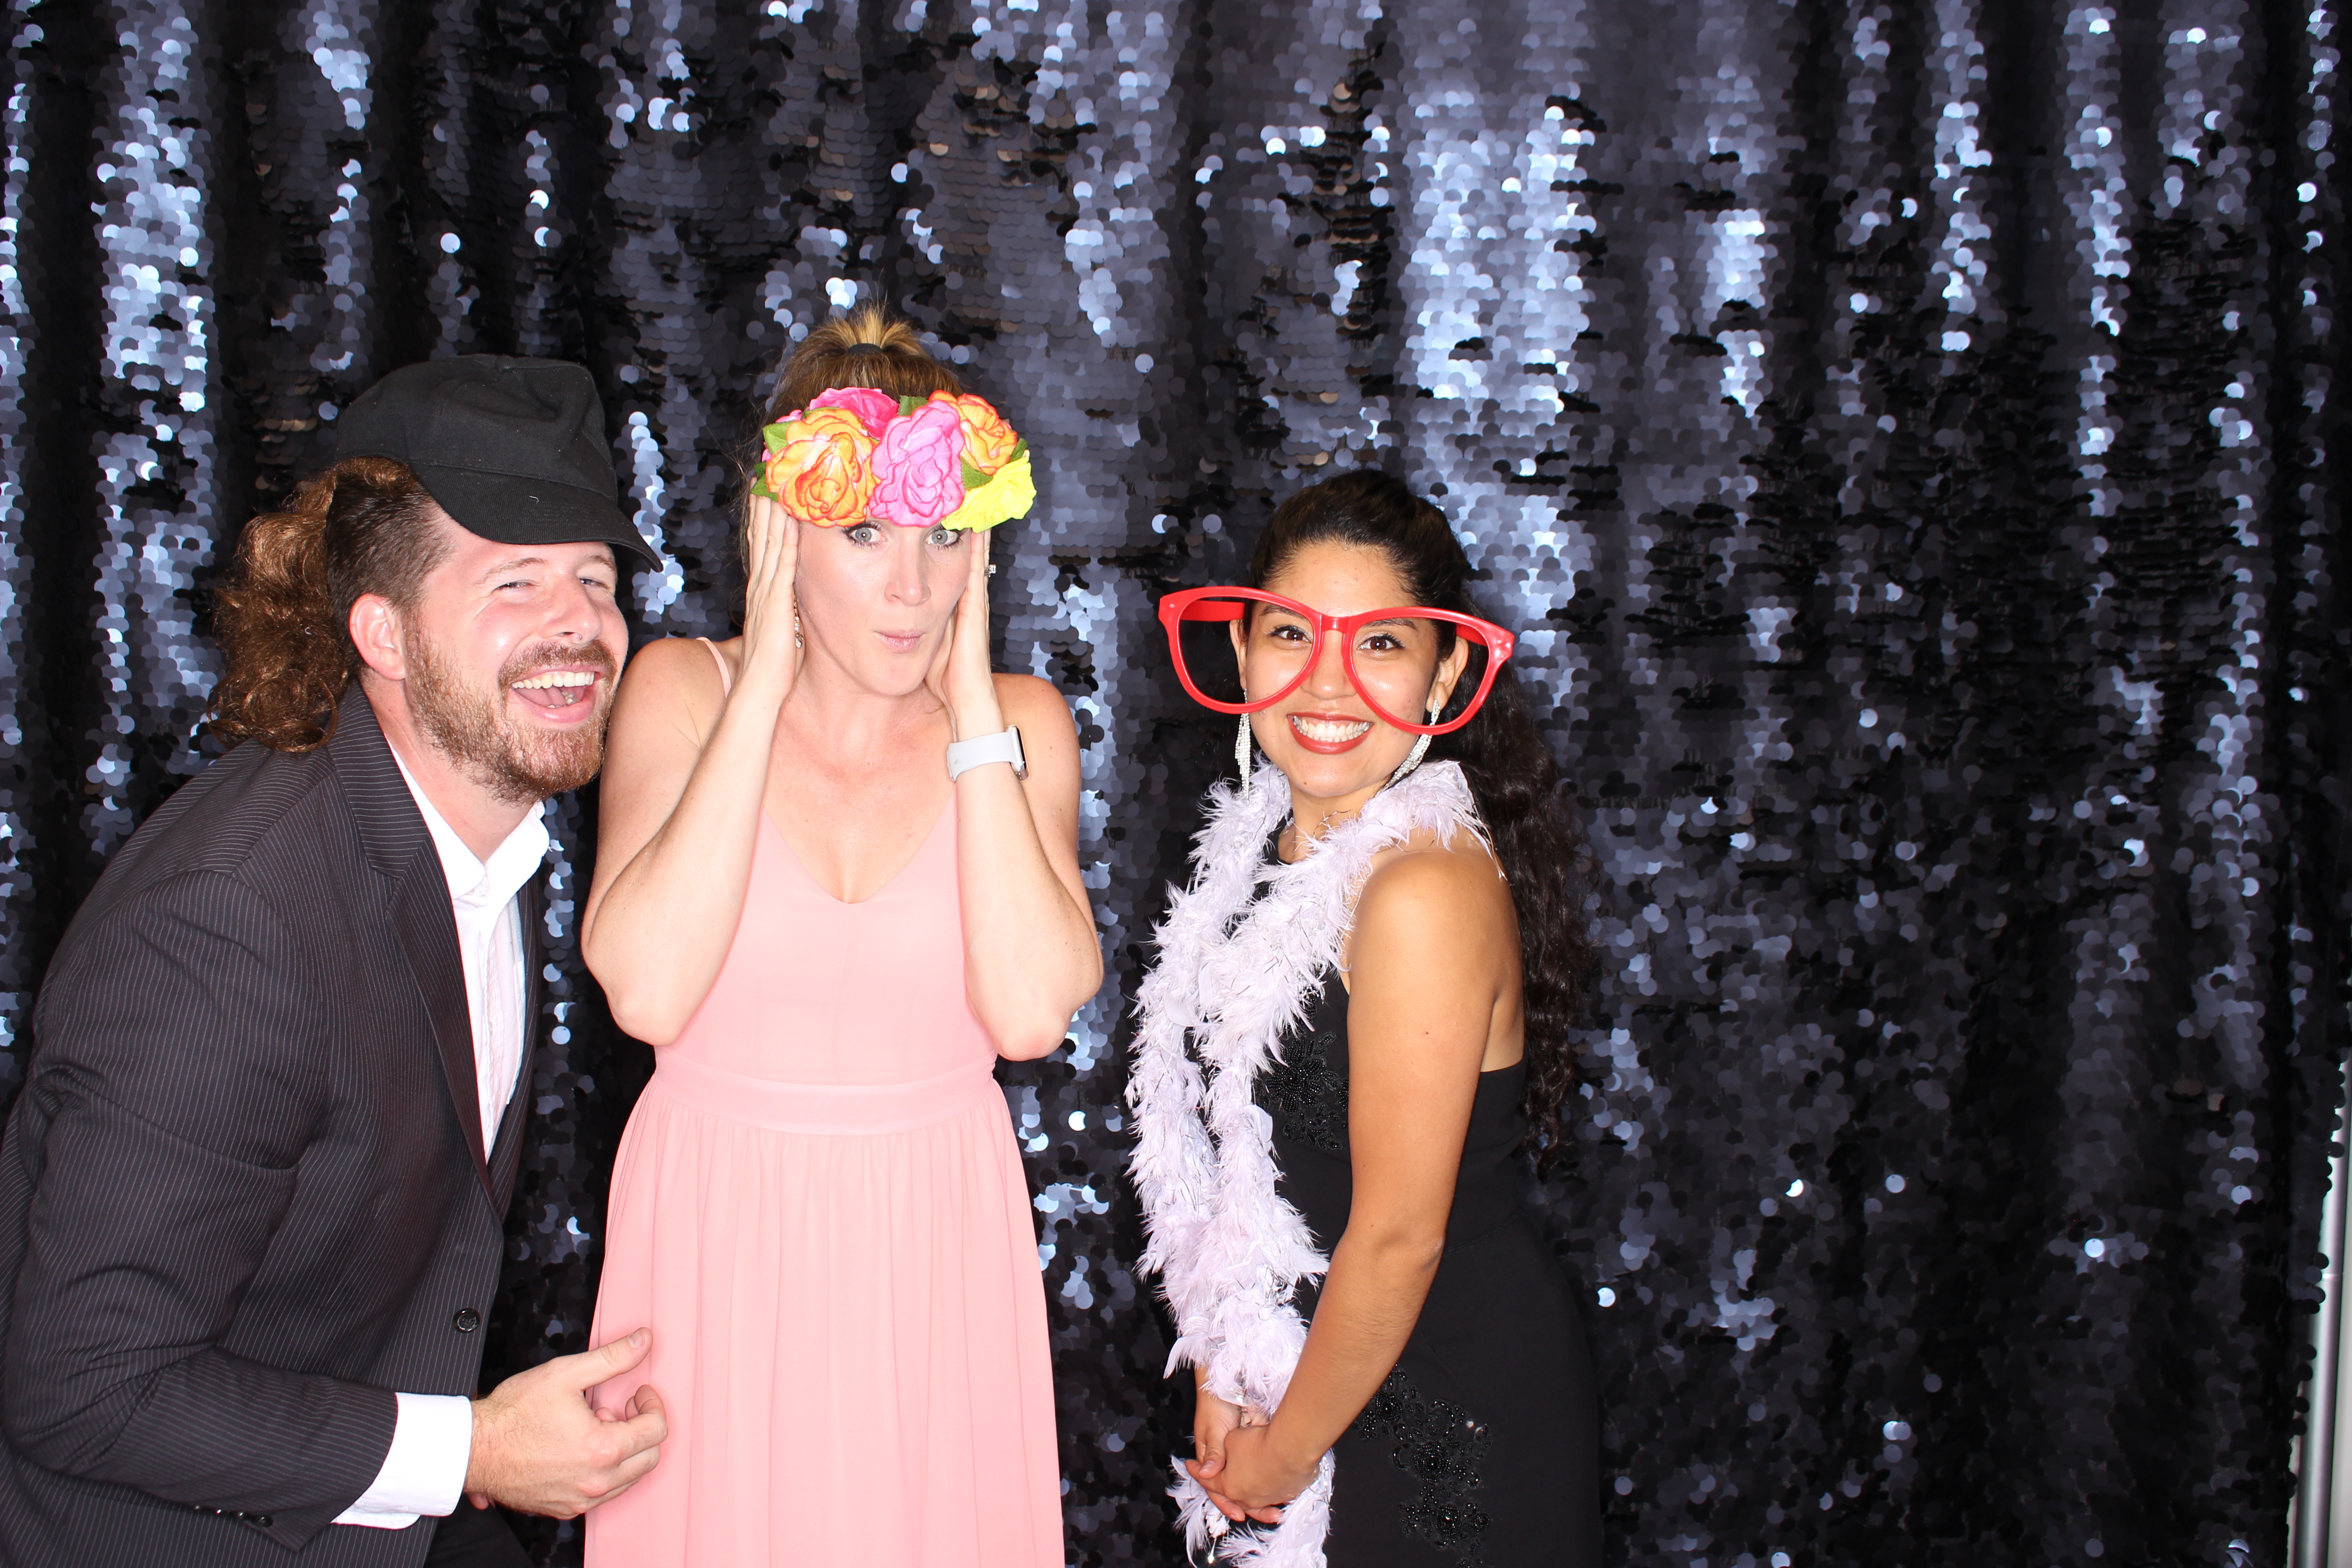 Three Points Wedding Reception And Photo Booth Banana Who